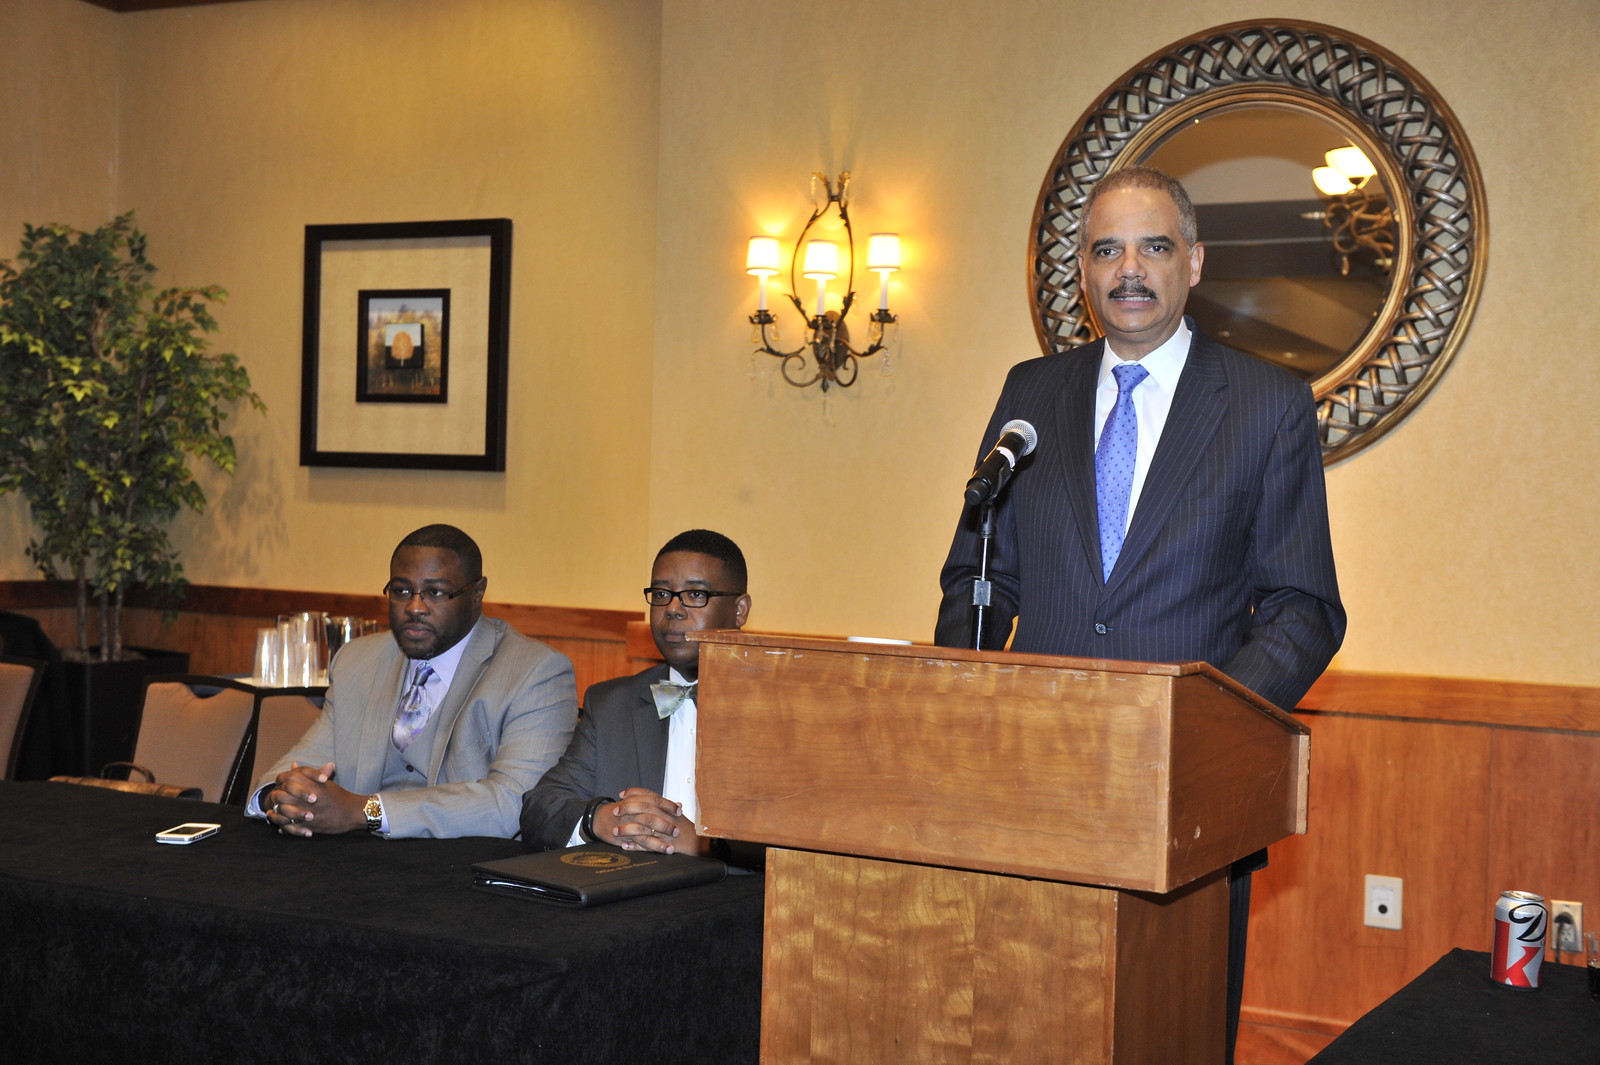 AFGE Council of Prison Locals Meeting with U. S. Attorney General Eric Holder